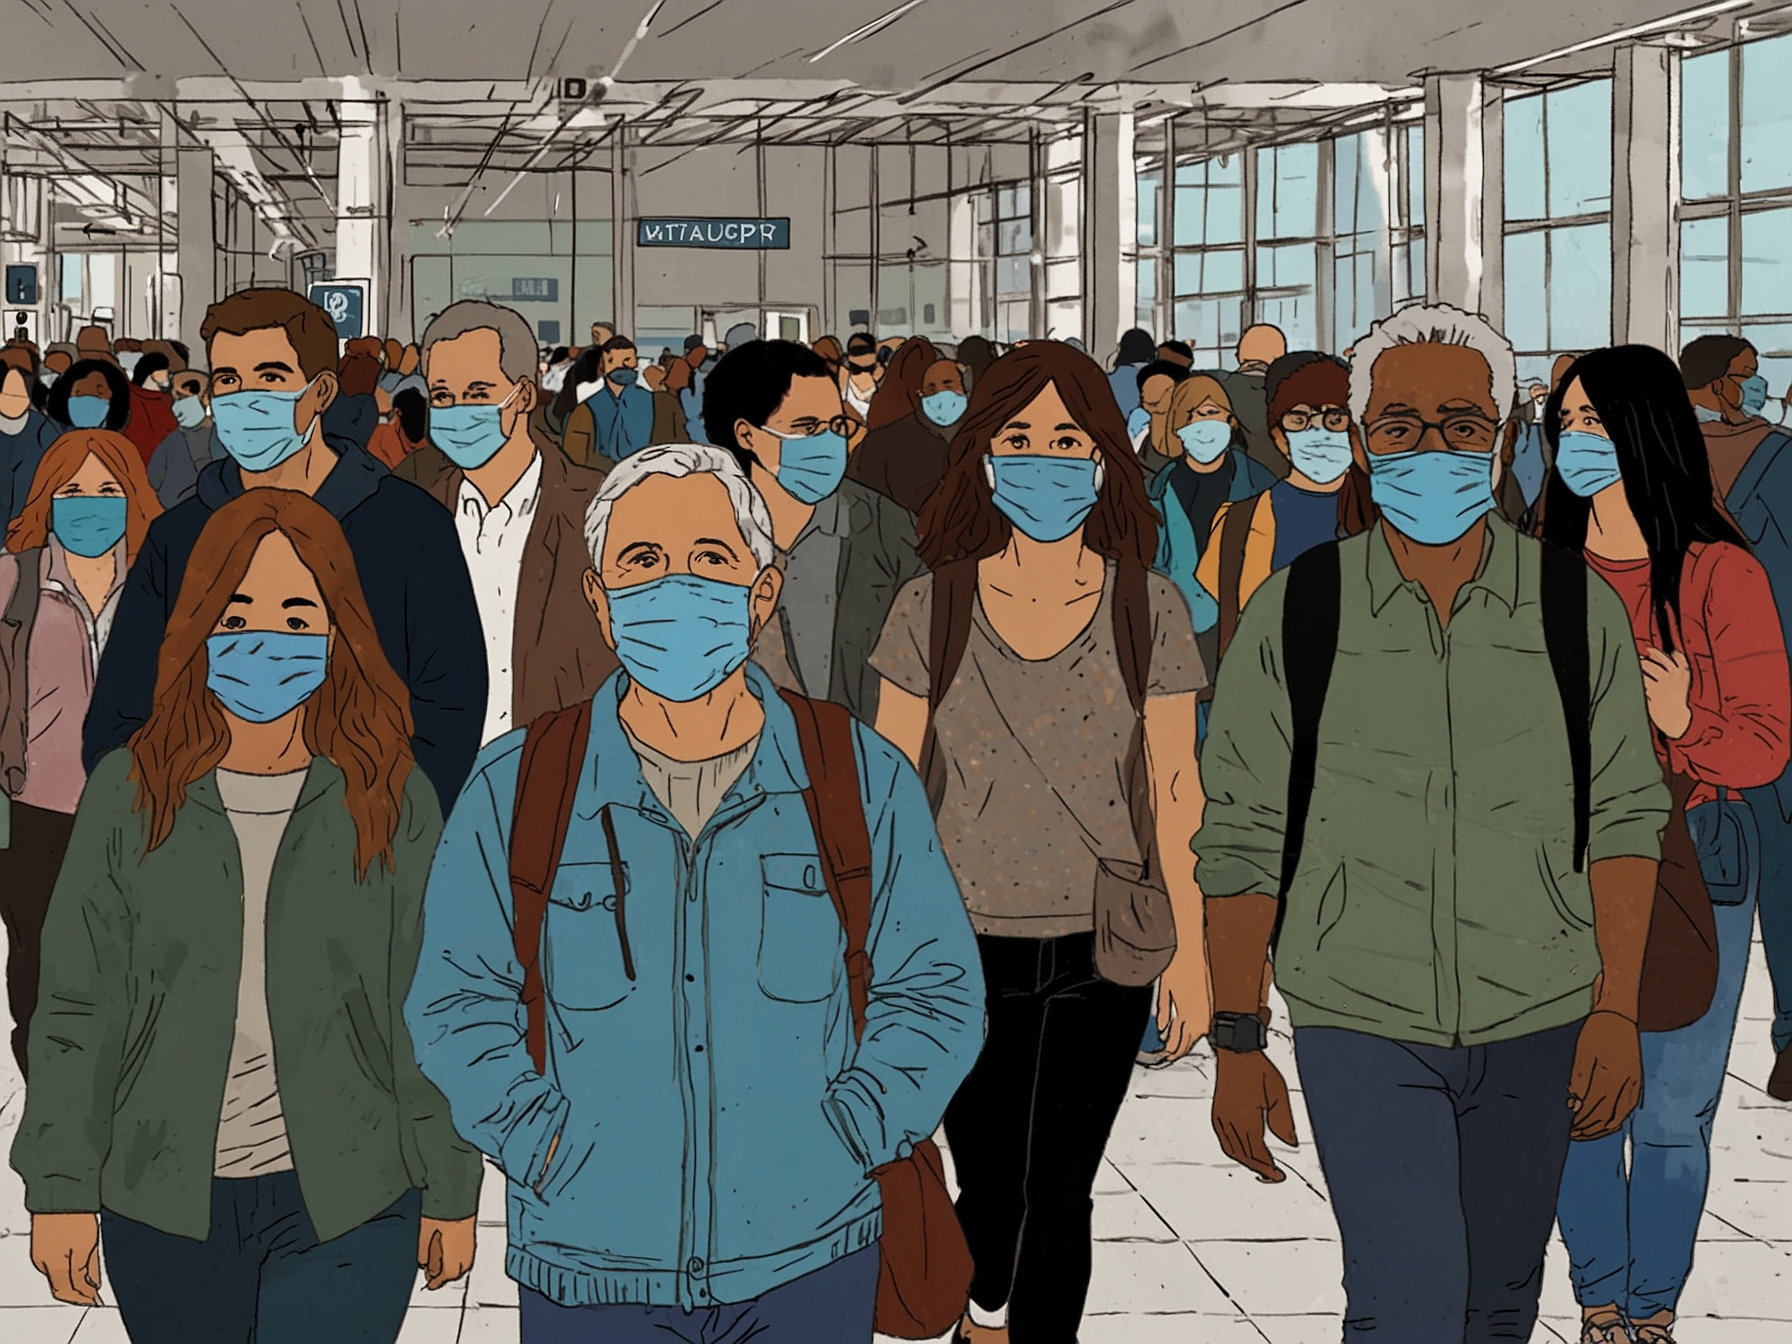 An illustration of tourists entering Seattle with face masks at the airport, highlighting the importance of wearing masks in crowded venues and during travel amid the anticipated COVID-19 surge.